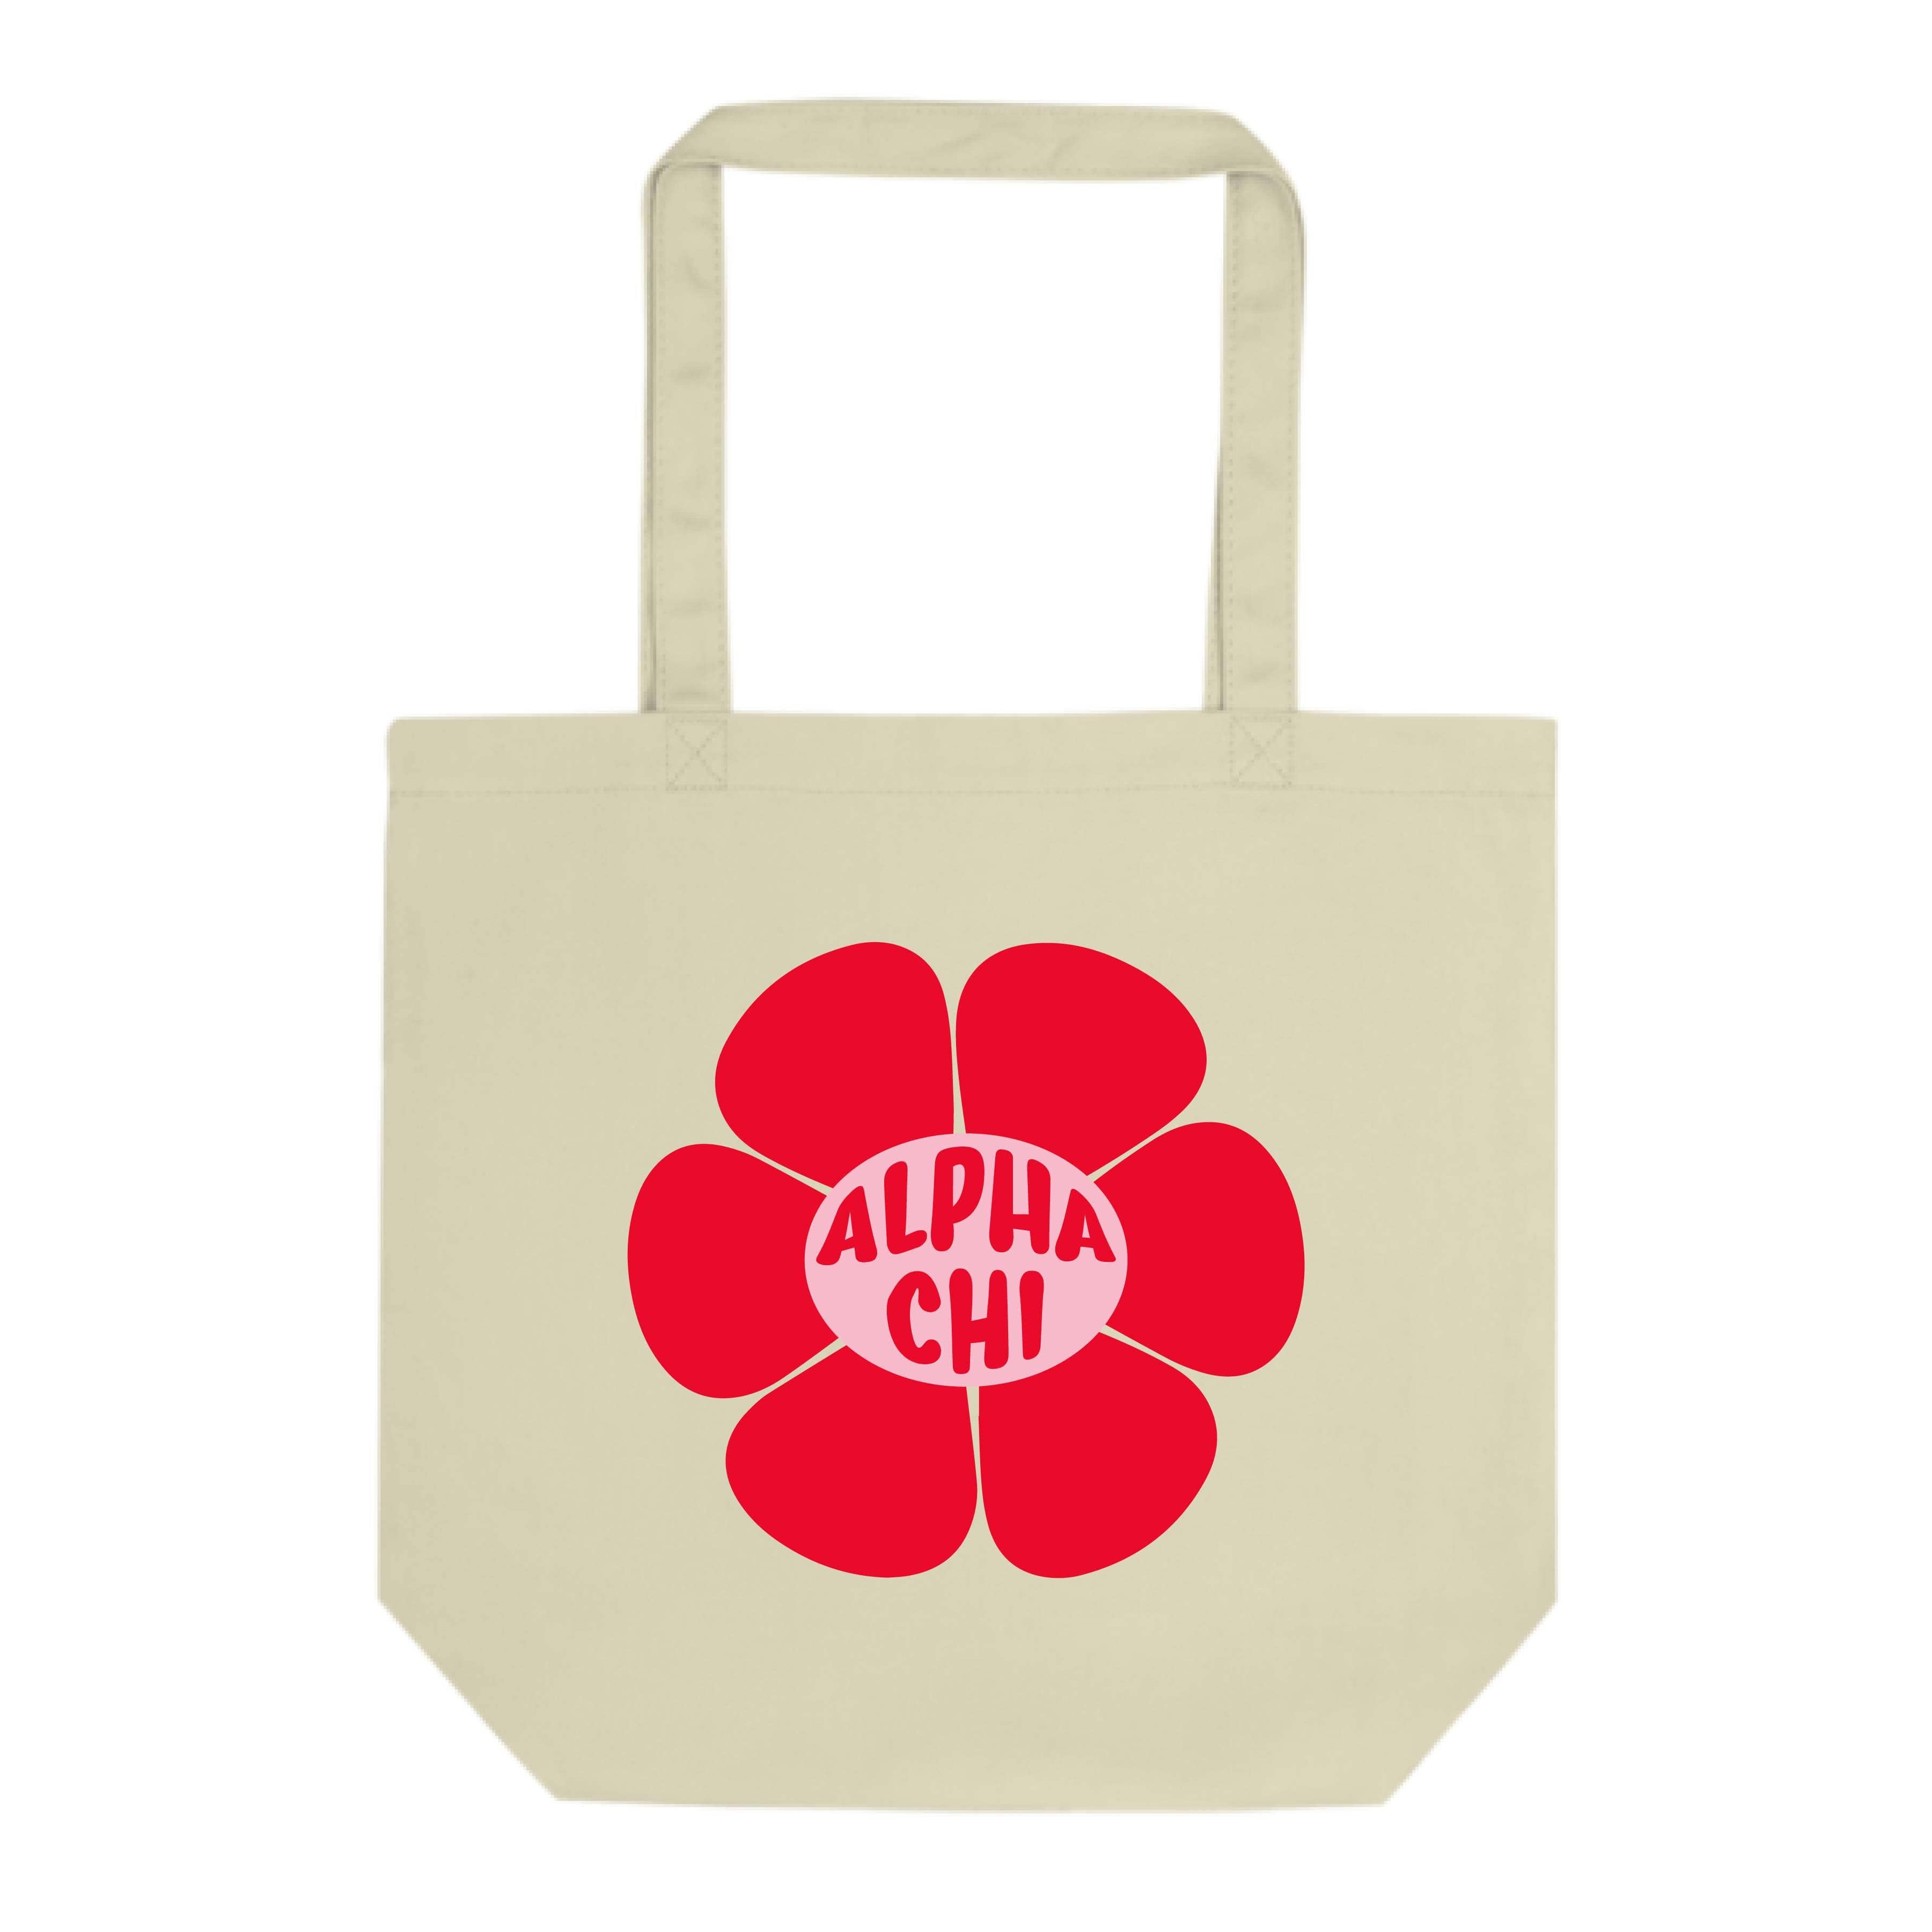 AOP Tote Bags - Favorite Fish – The Murphy Collective LLC